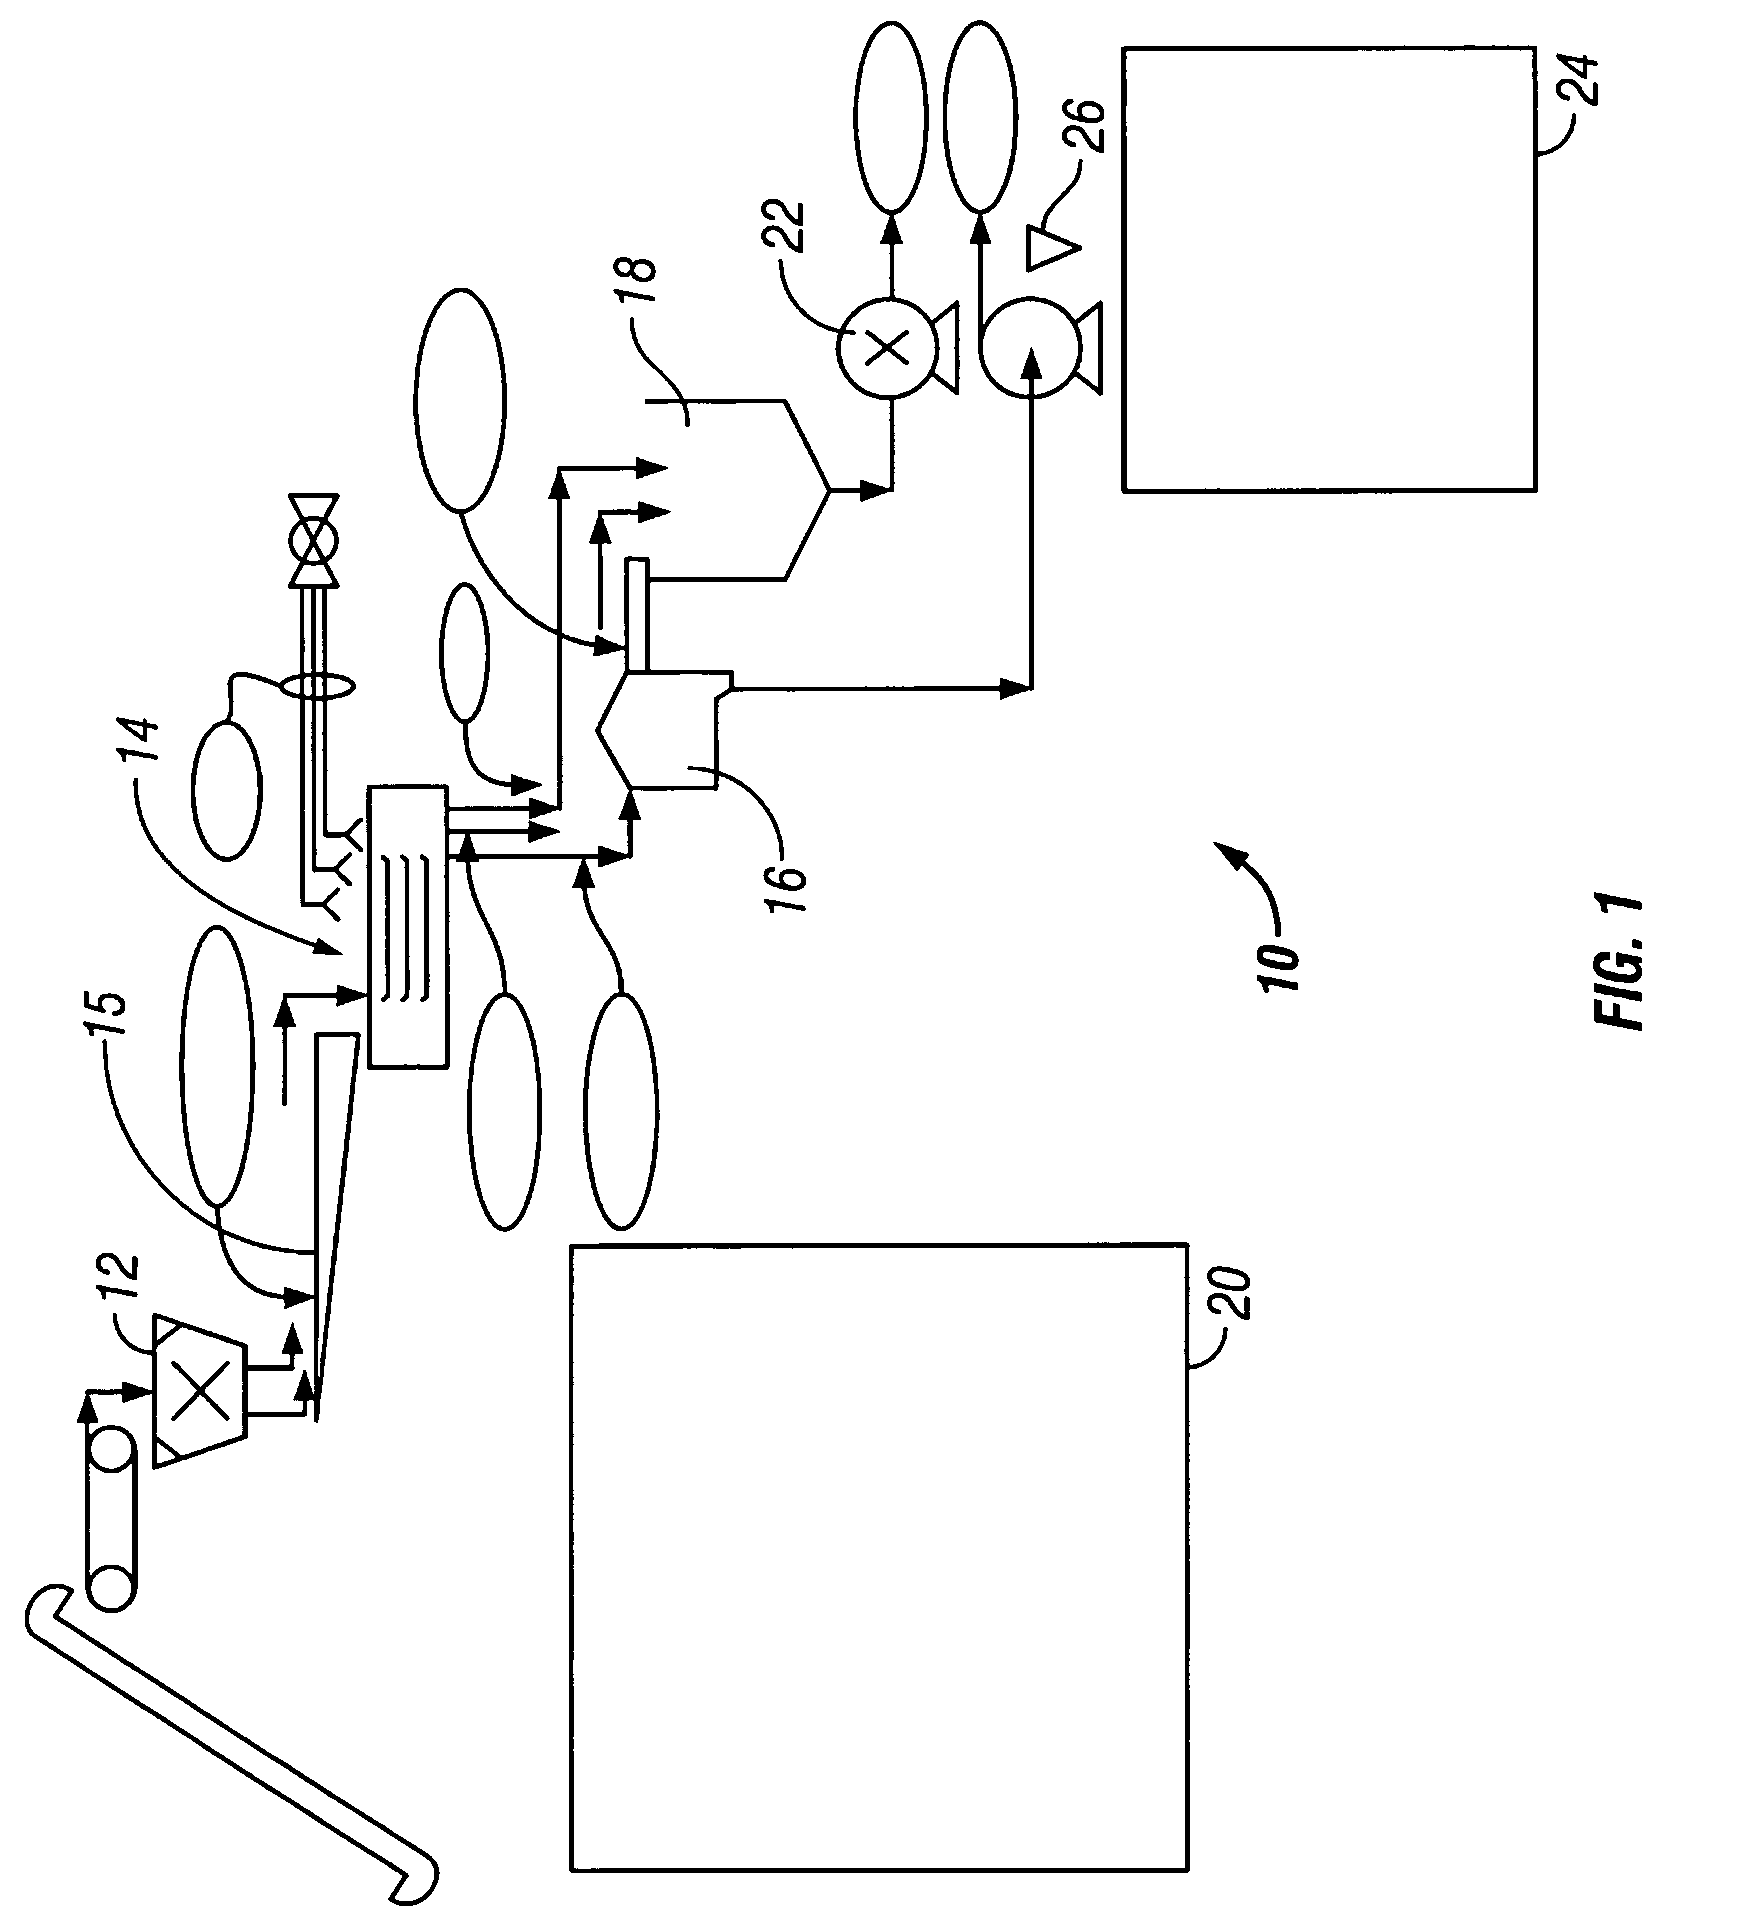 Method for processing tomatoes for the production of chunk tomato products